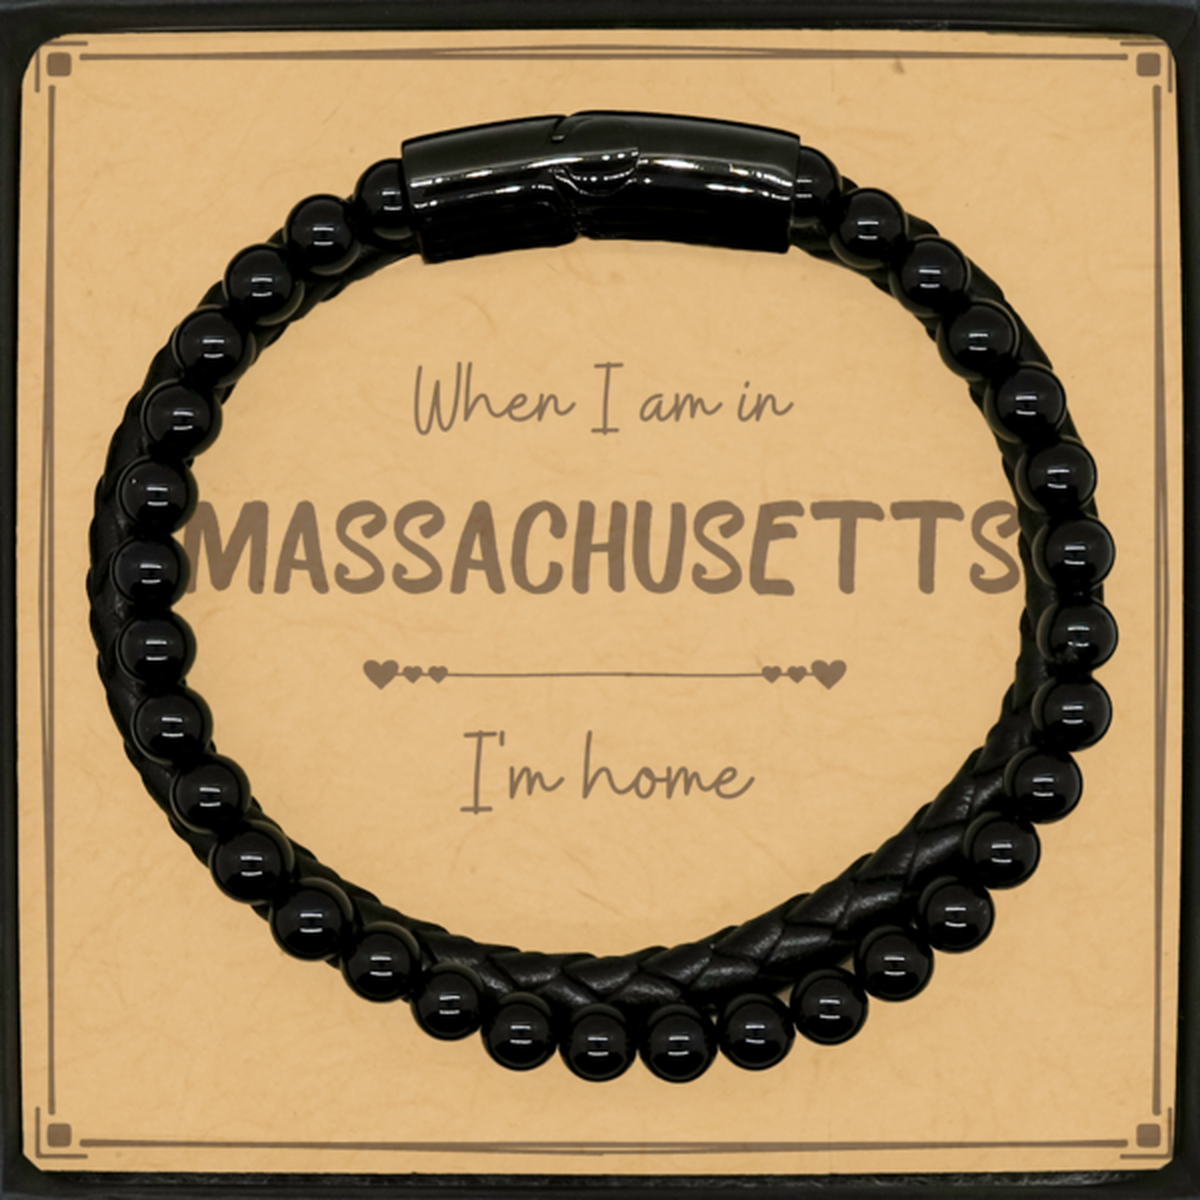 When I am in Massachusetts I'm home Stone Leather Bracelets, Message Card Gifts For Massachusetts, State Massachusetts Birthday Gifts for Friends Coworker